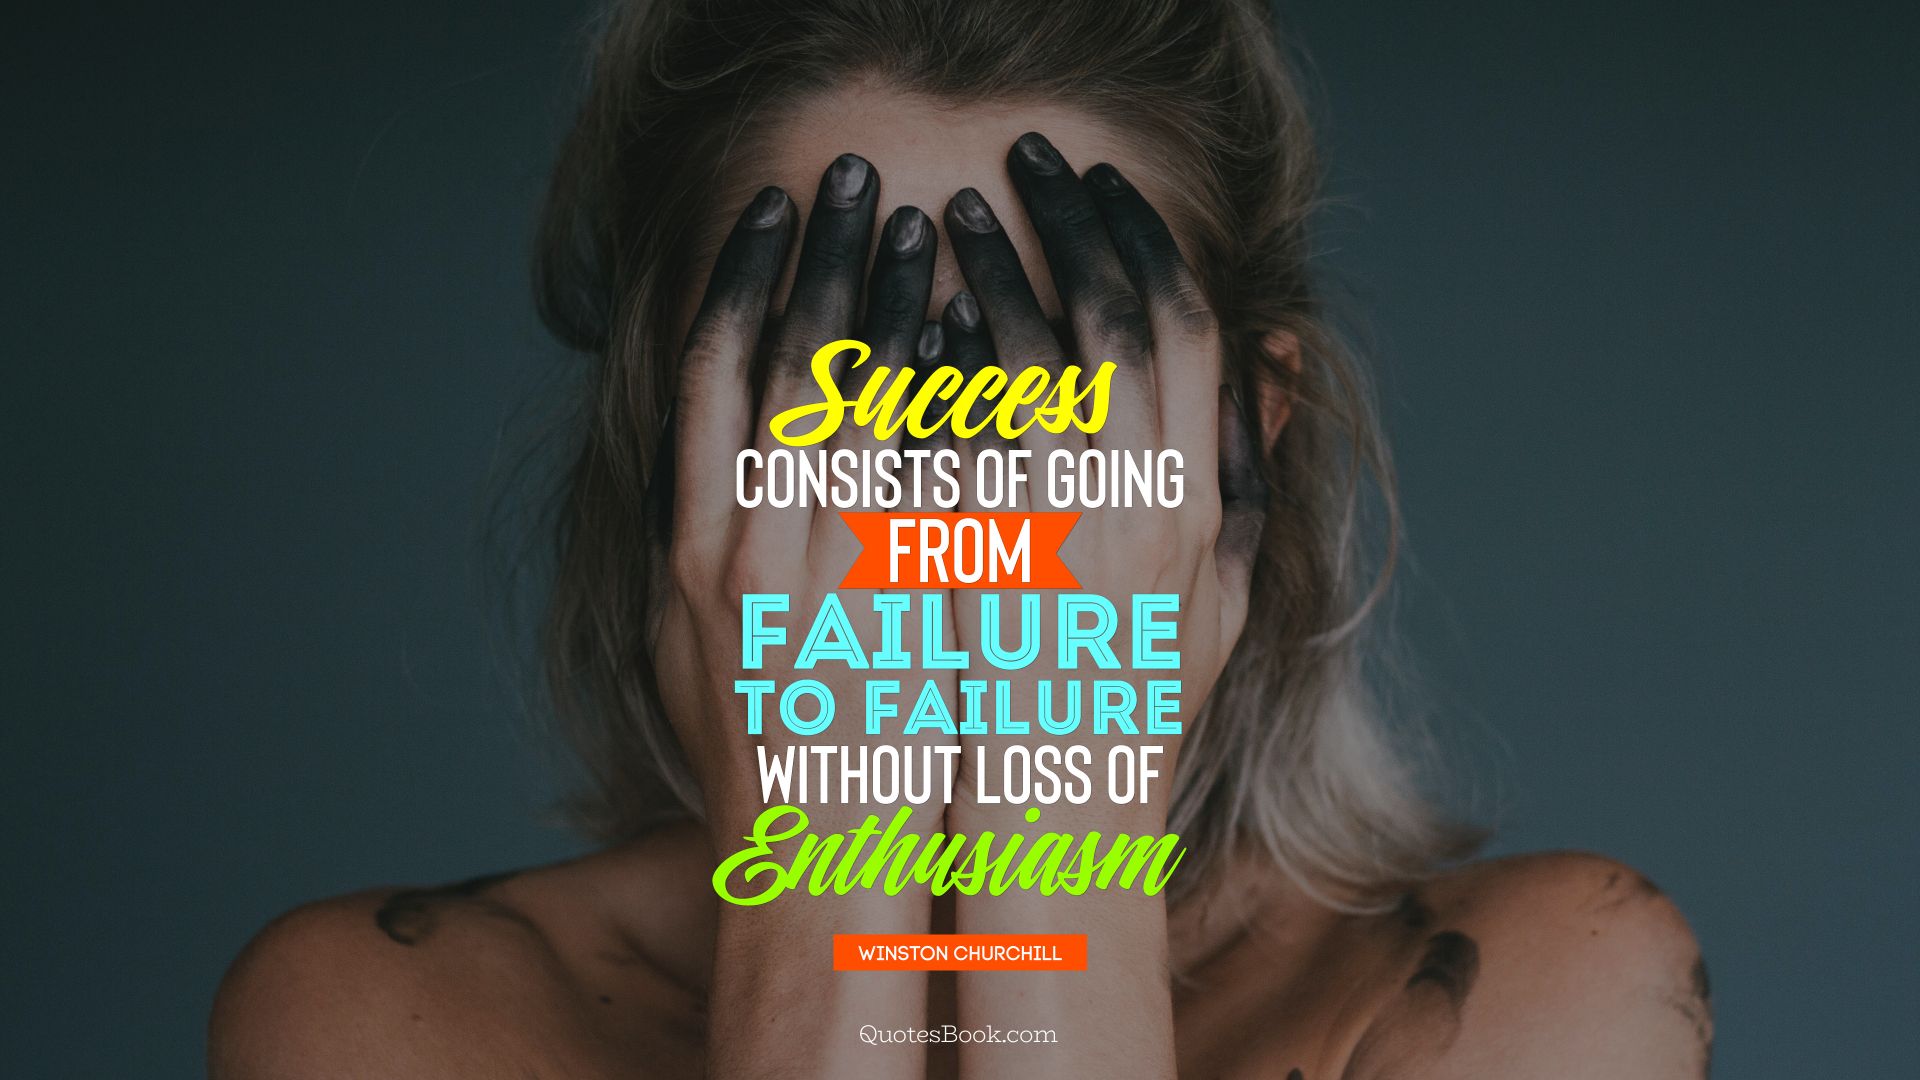 Success consists of going from failure to failure without loss of enthusiasm. - Quote by Winston Churchill